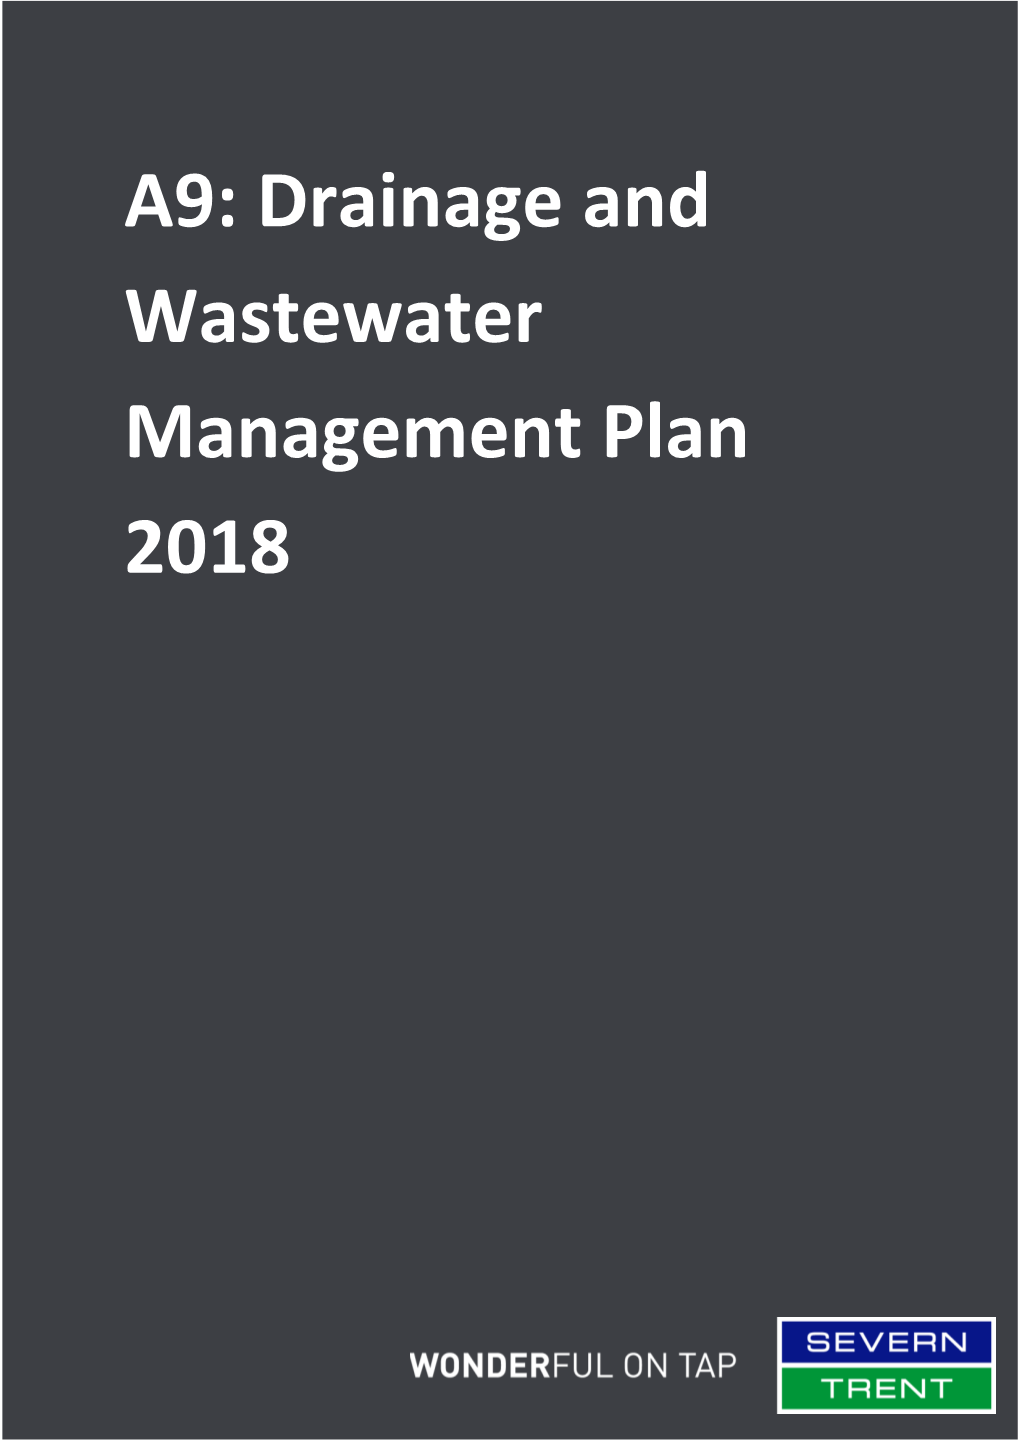 A9: Drainage and Wastewater Management Plan 2018